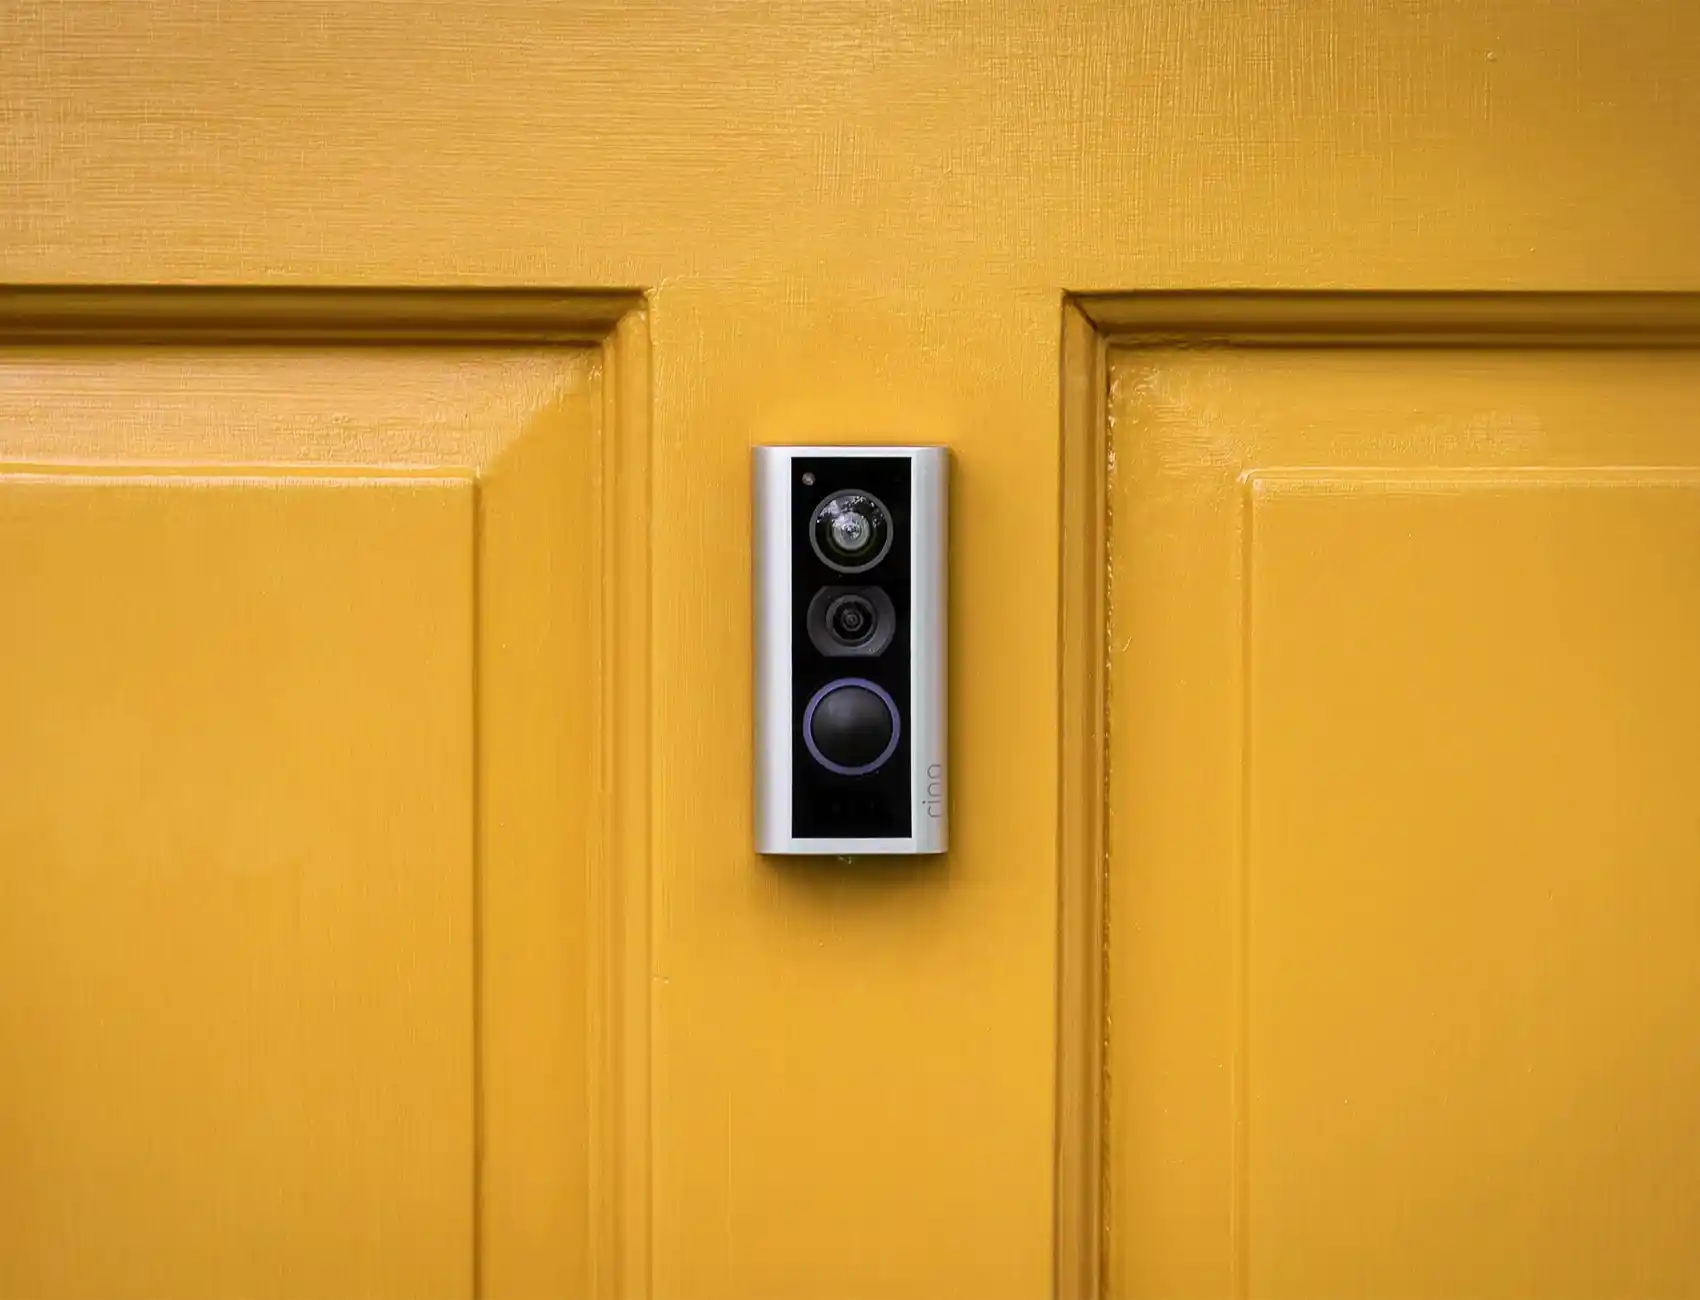 Ring peephole cam on a yellow front door